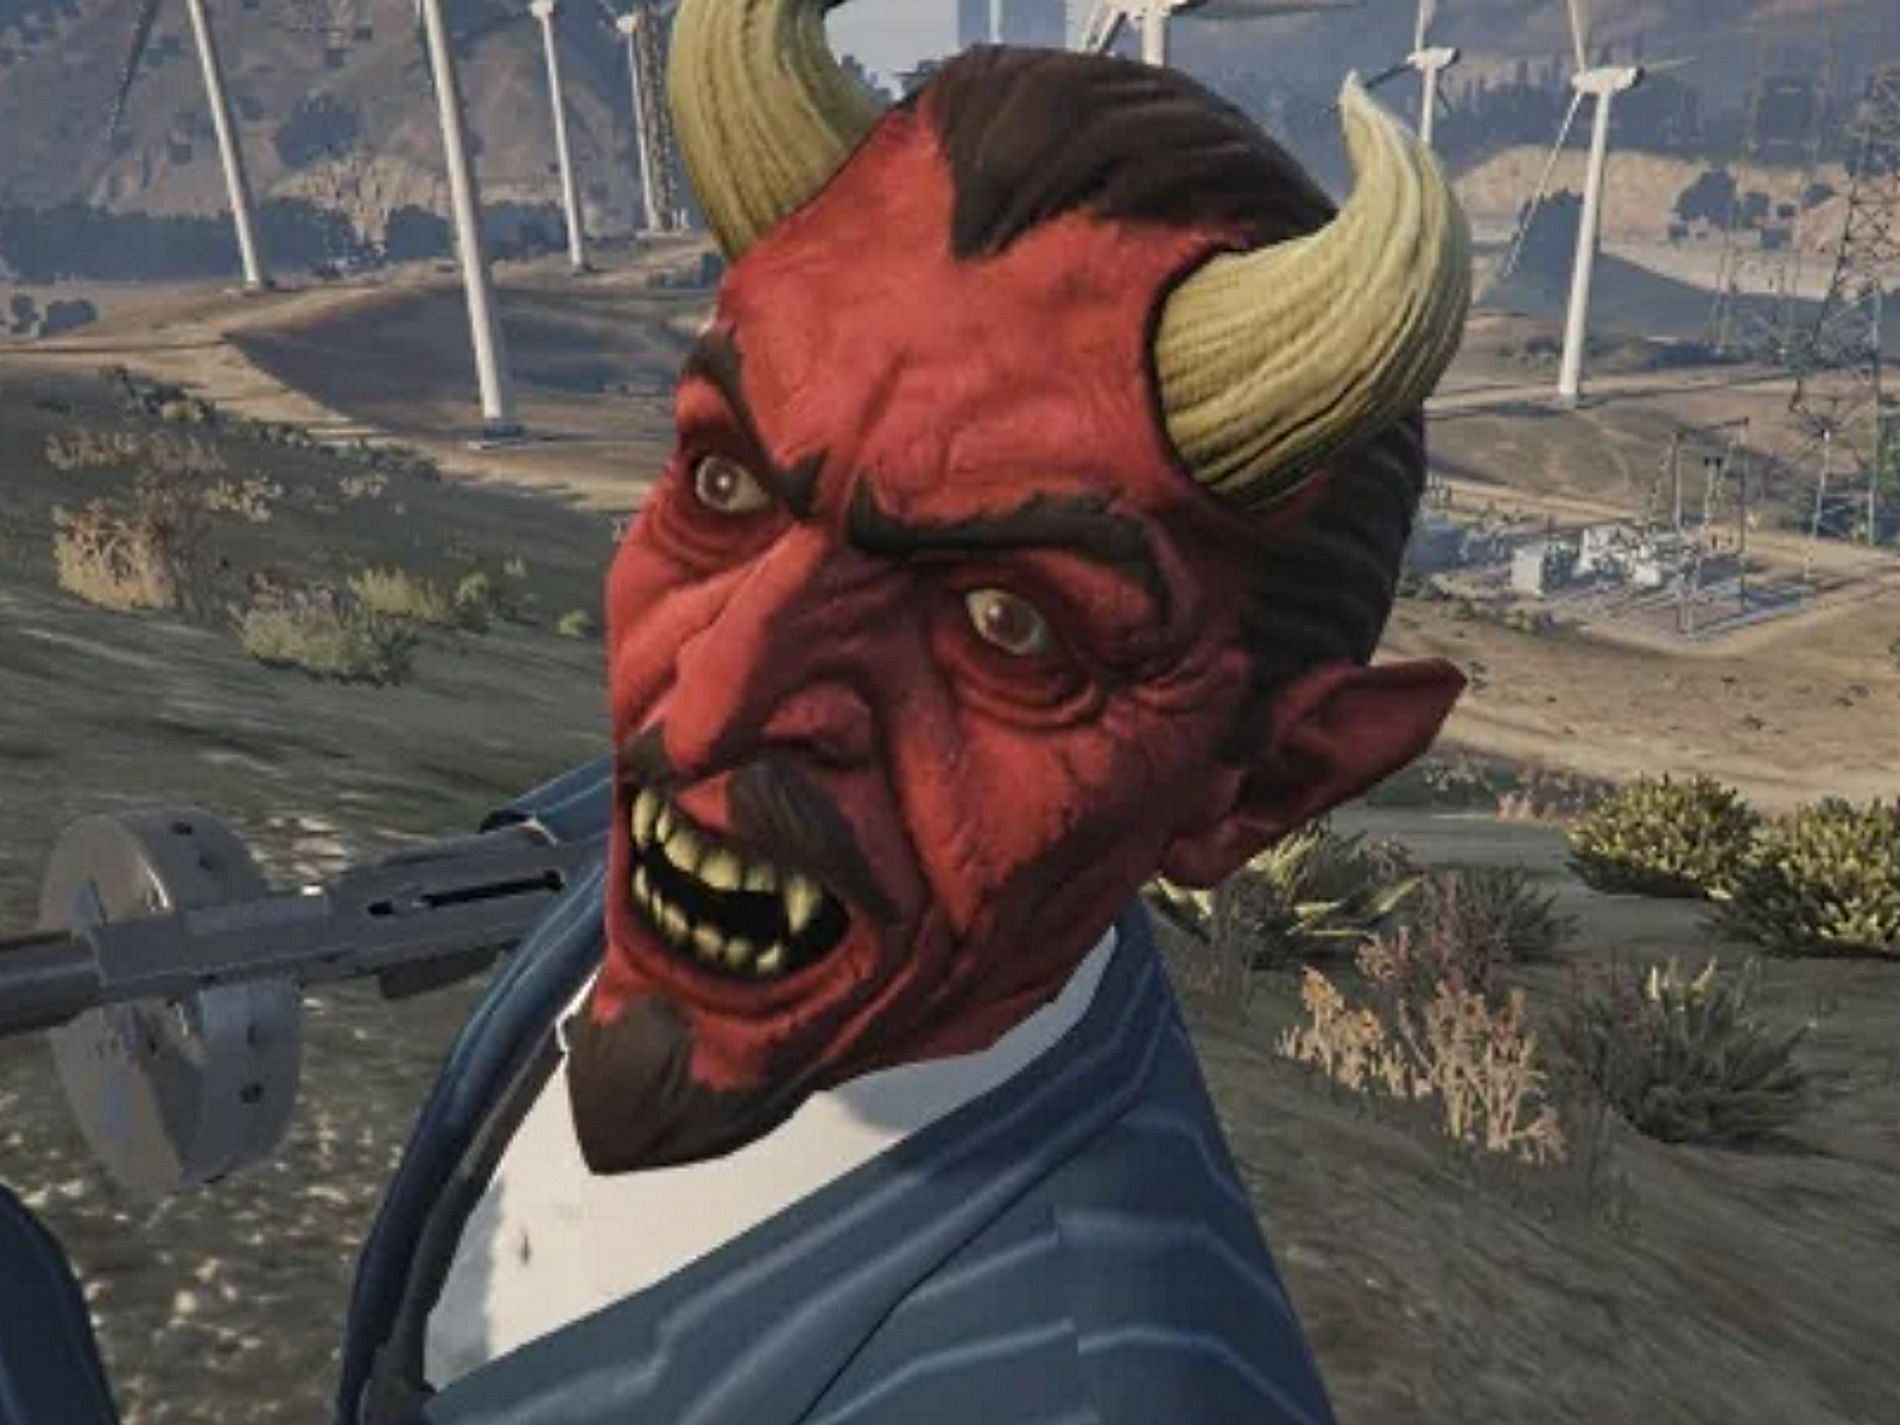 Some GTA 5 mods could frighten the player (Image via Rockstar Games)